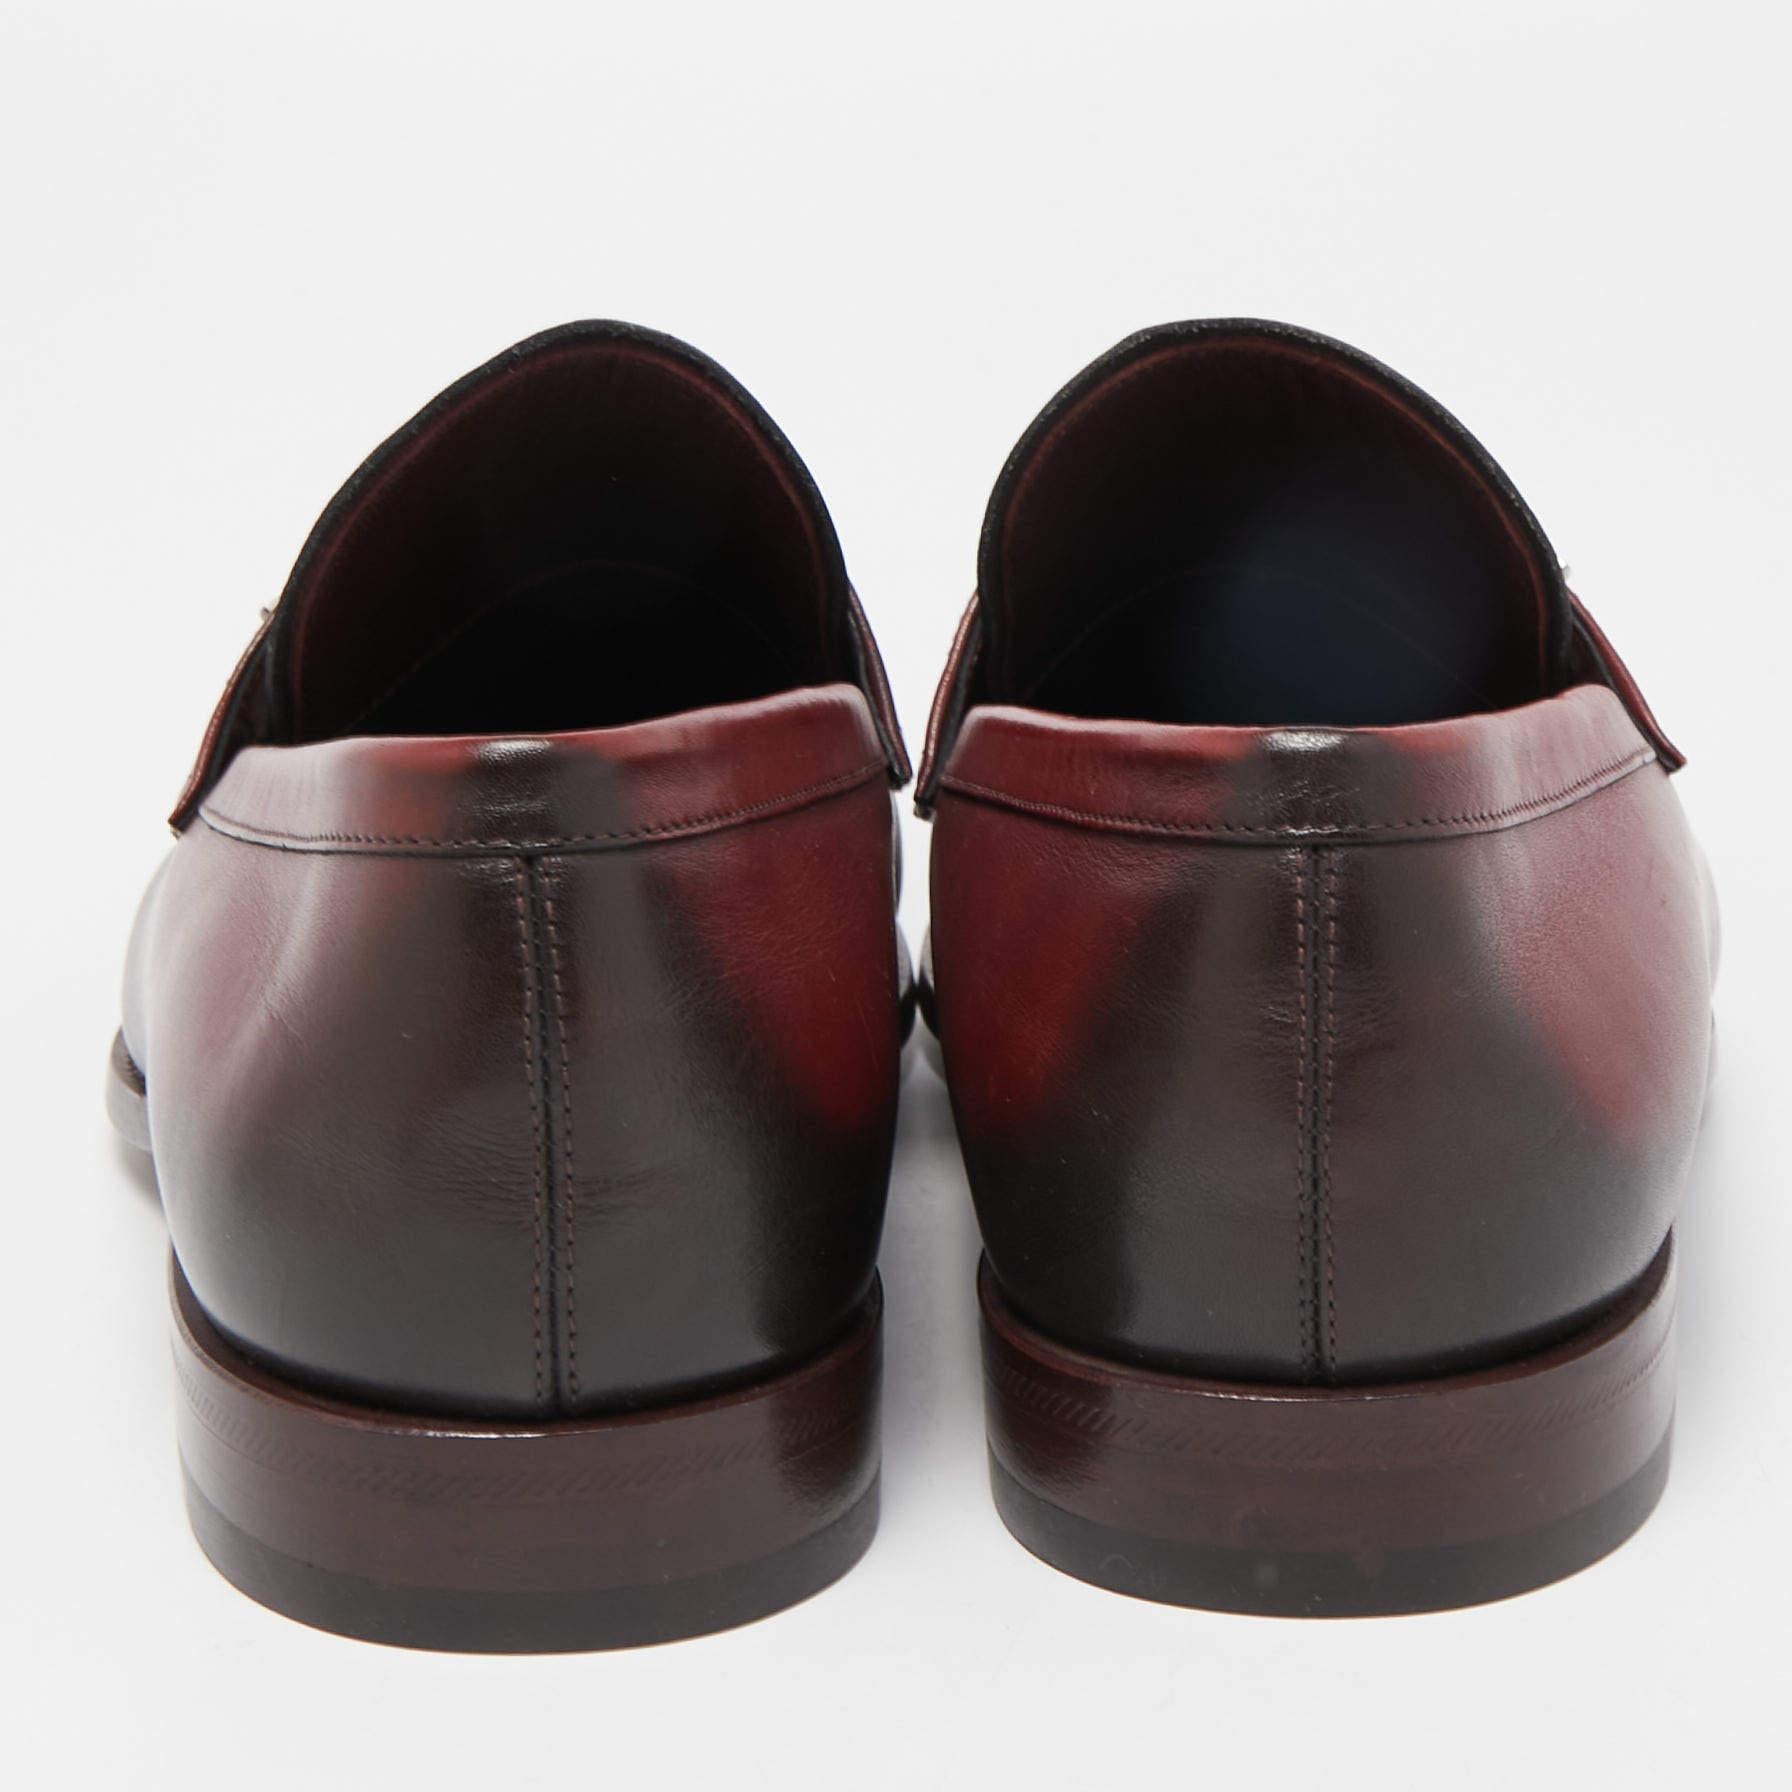 Louise Vuitton Burgundy/Black Leather Slip On Loafers Size 41 3